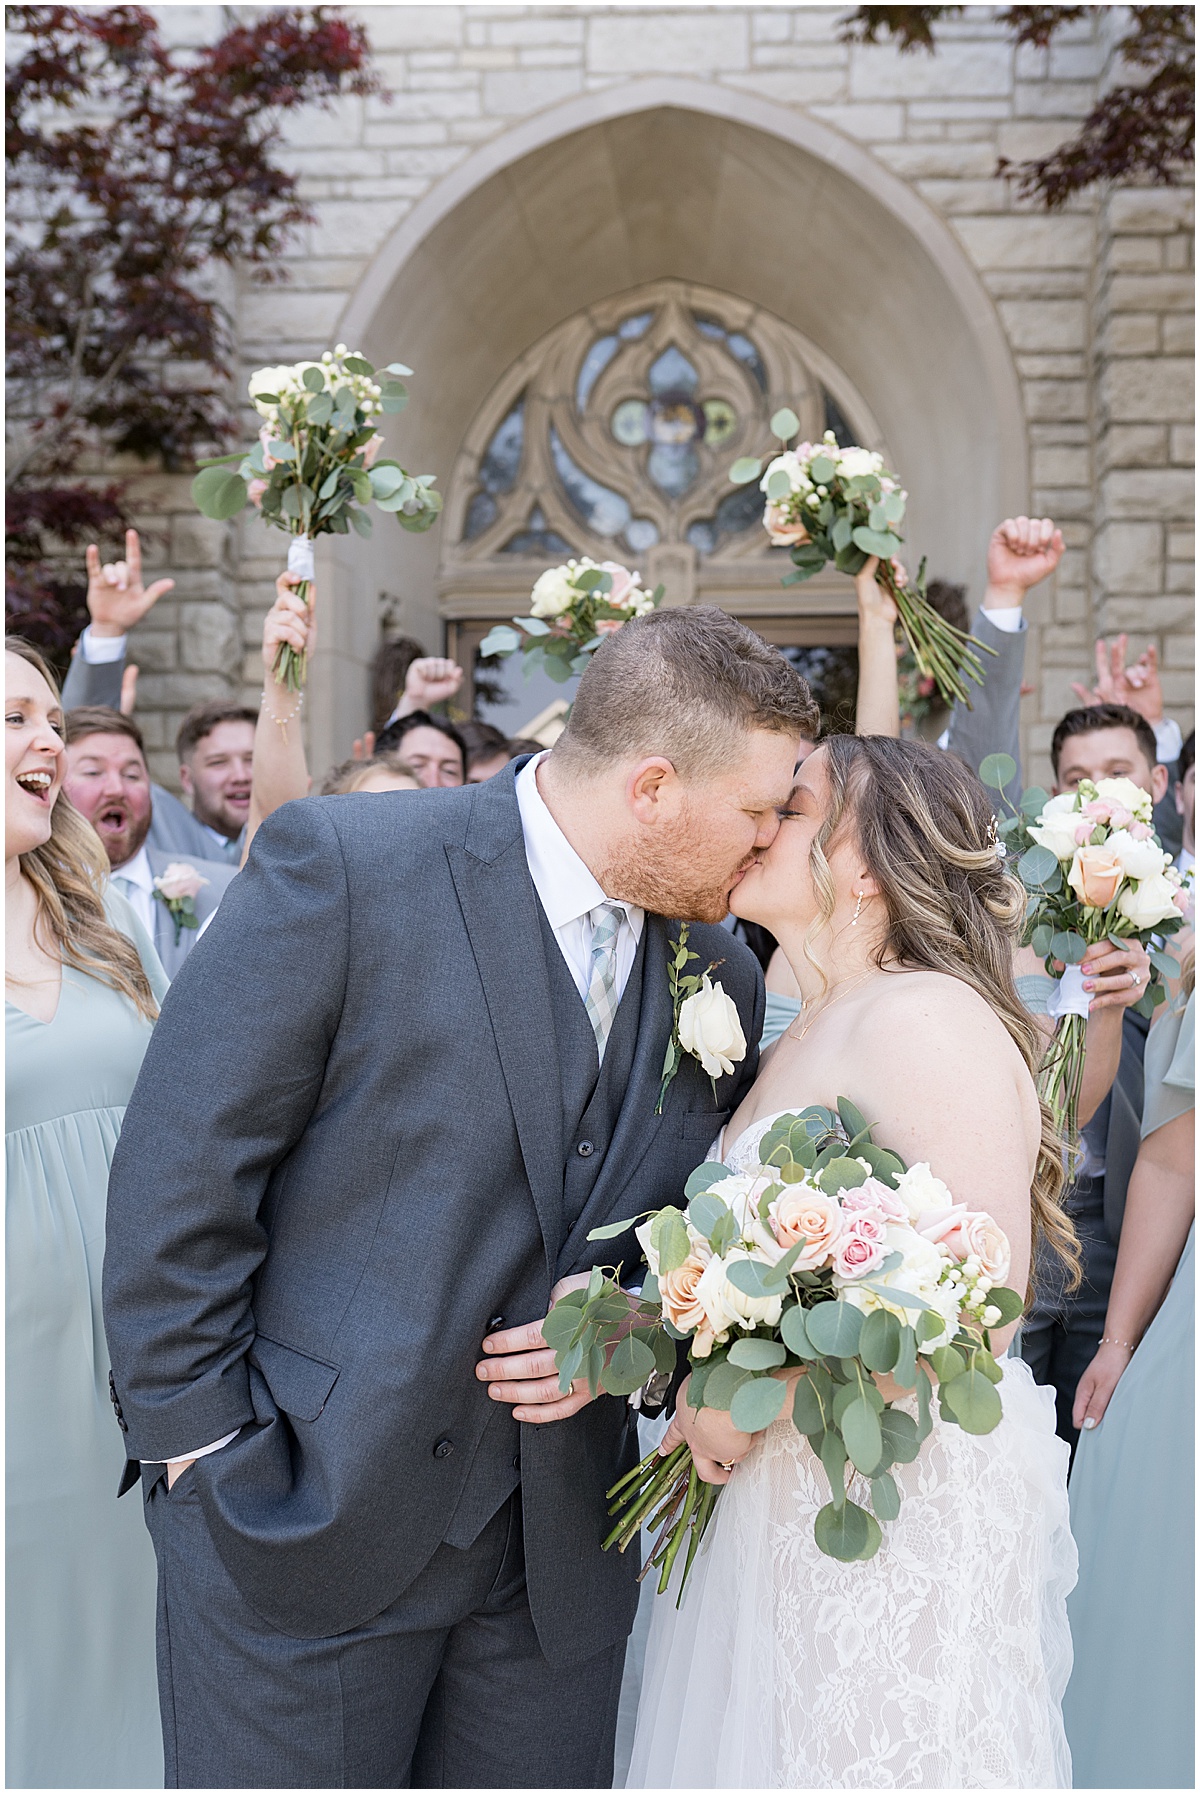 Newlyweds kiss after wedding at St. Augustine Catholic Church in Rensselaer, Indiana